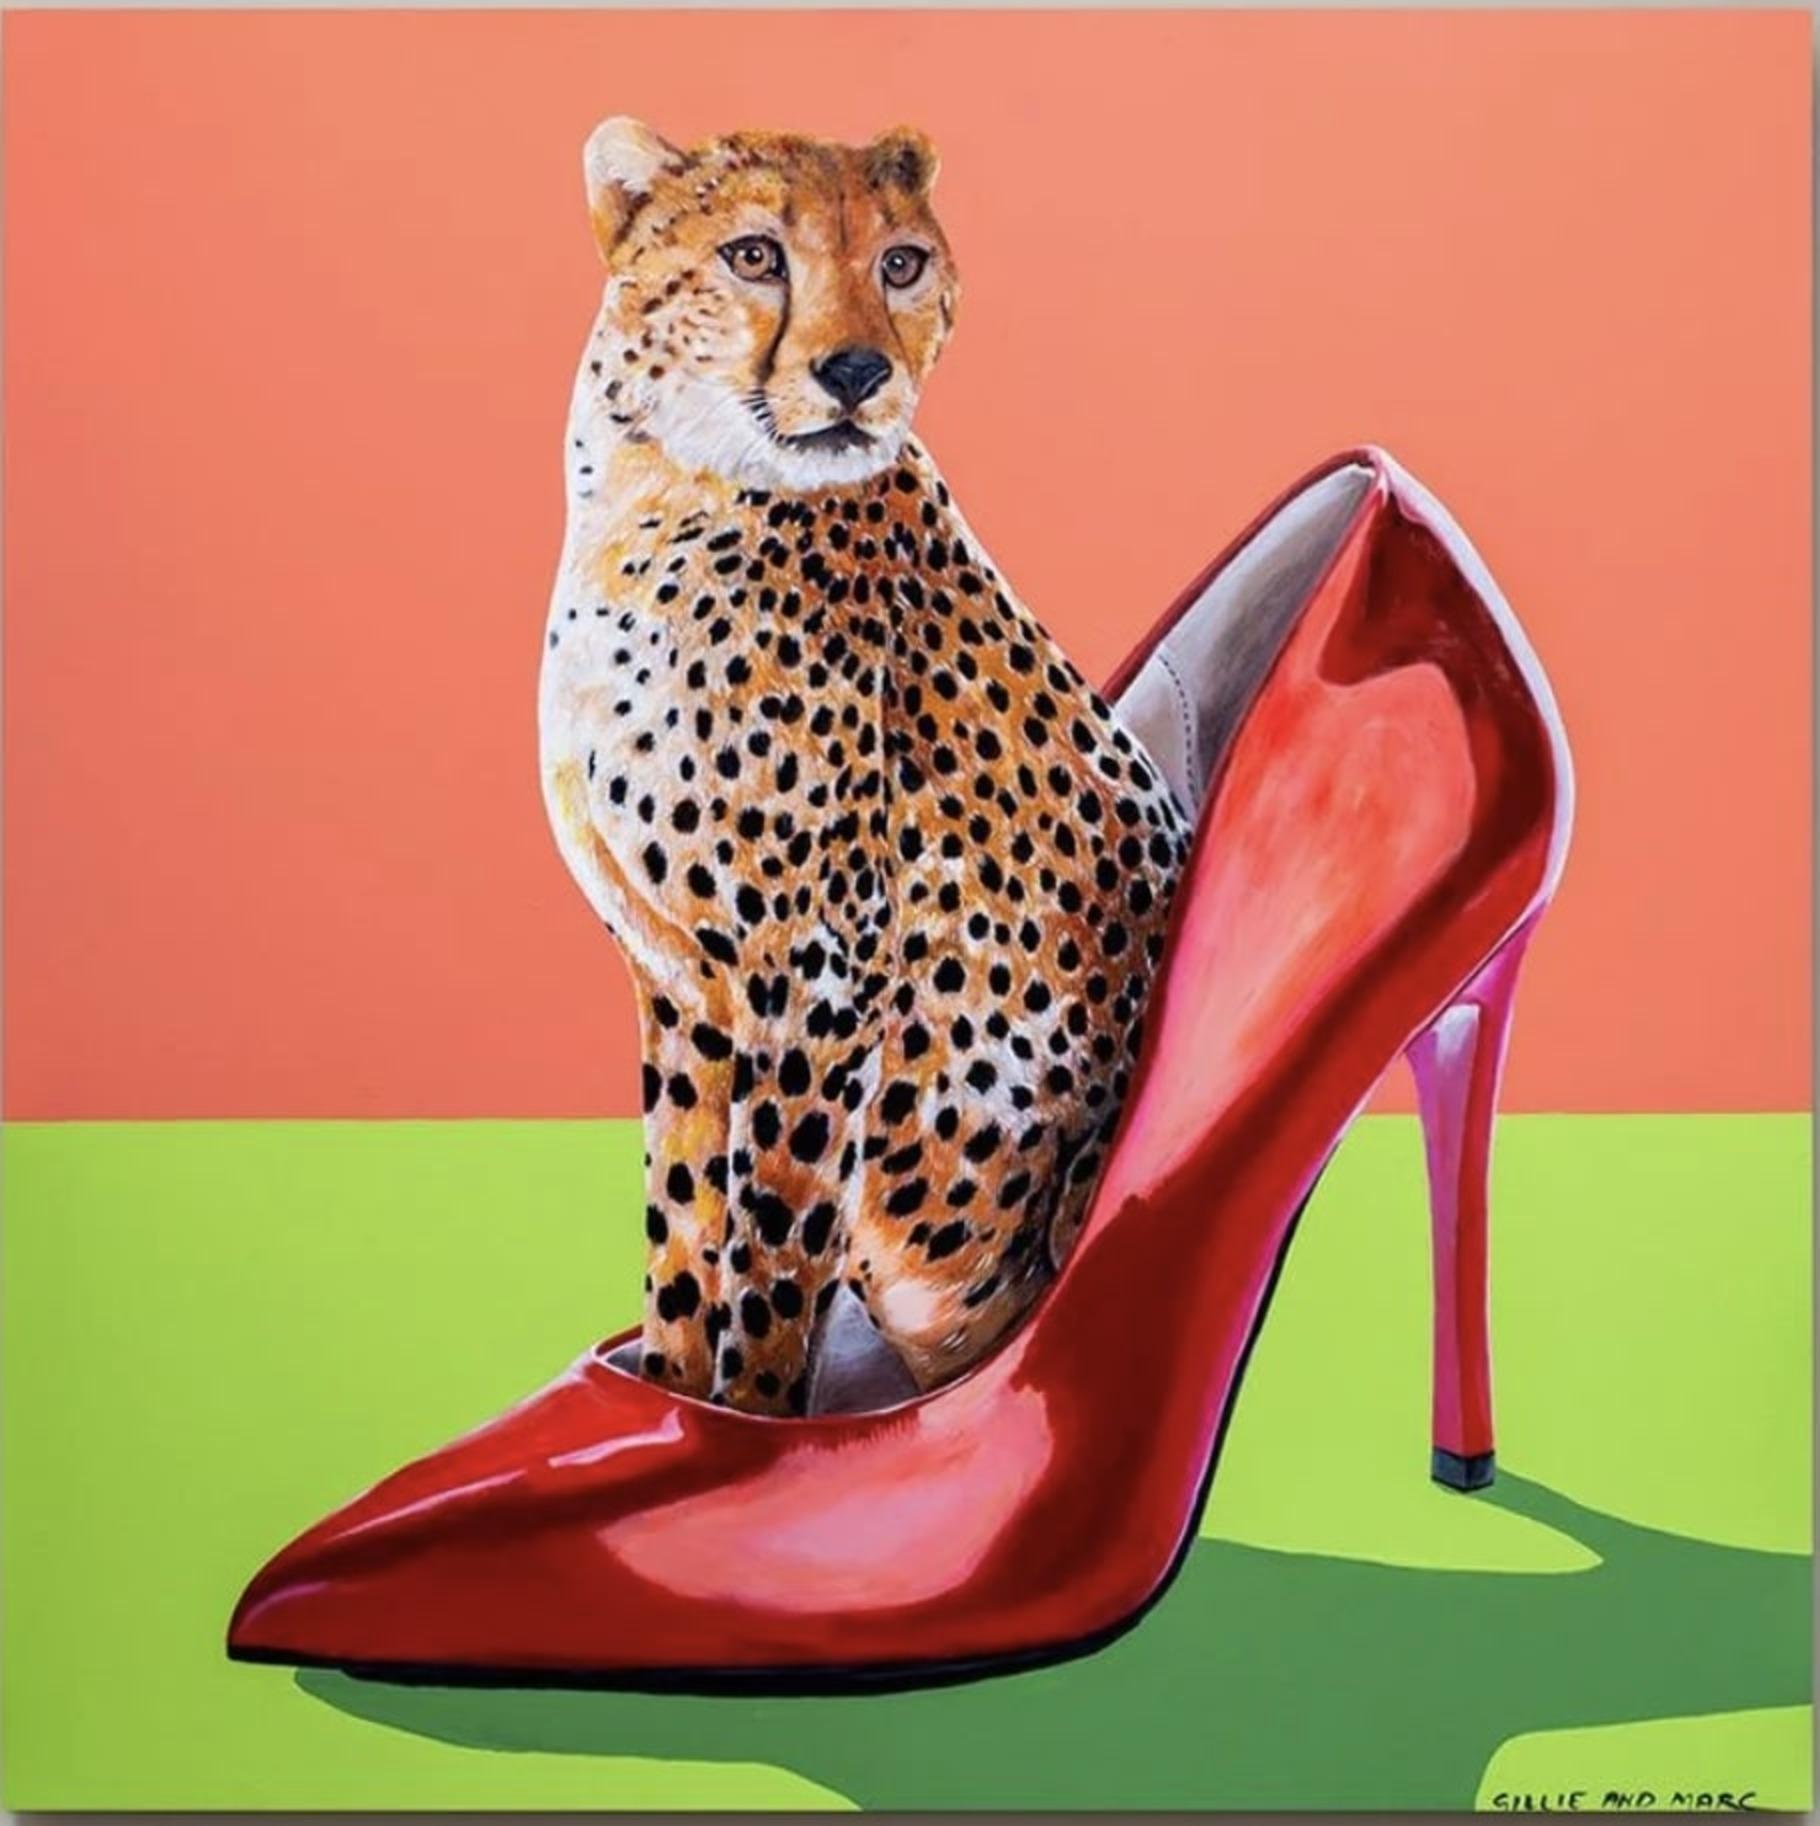 My Favourite Cheetah In A Shoe